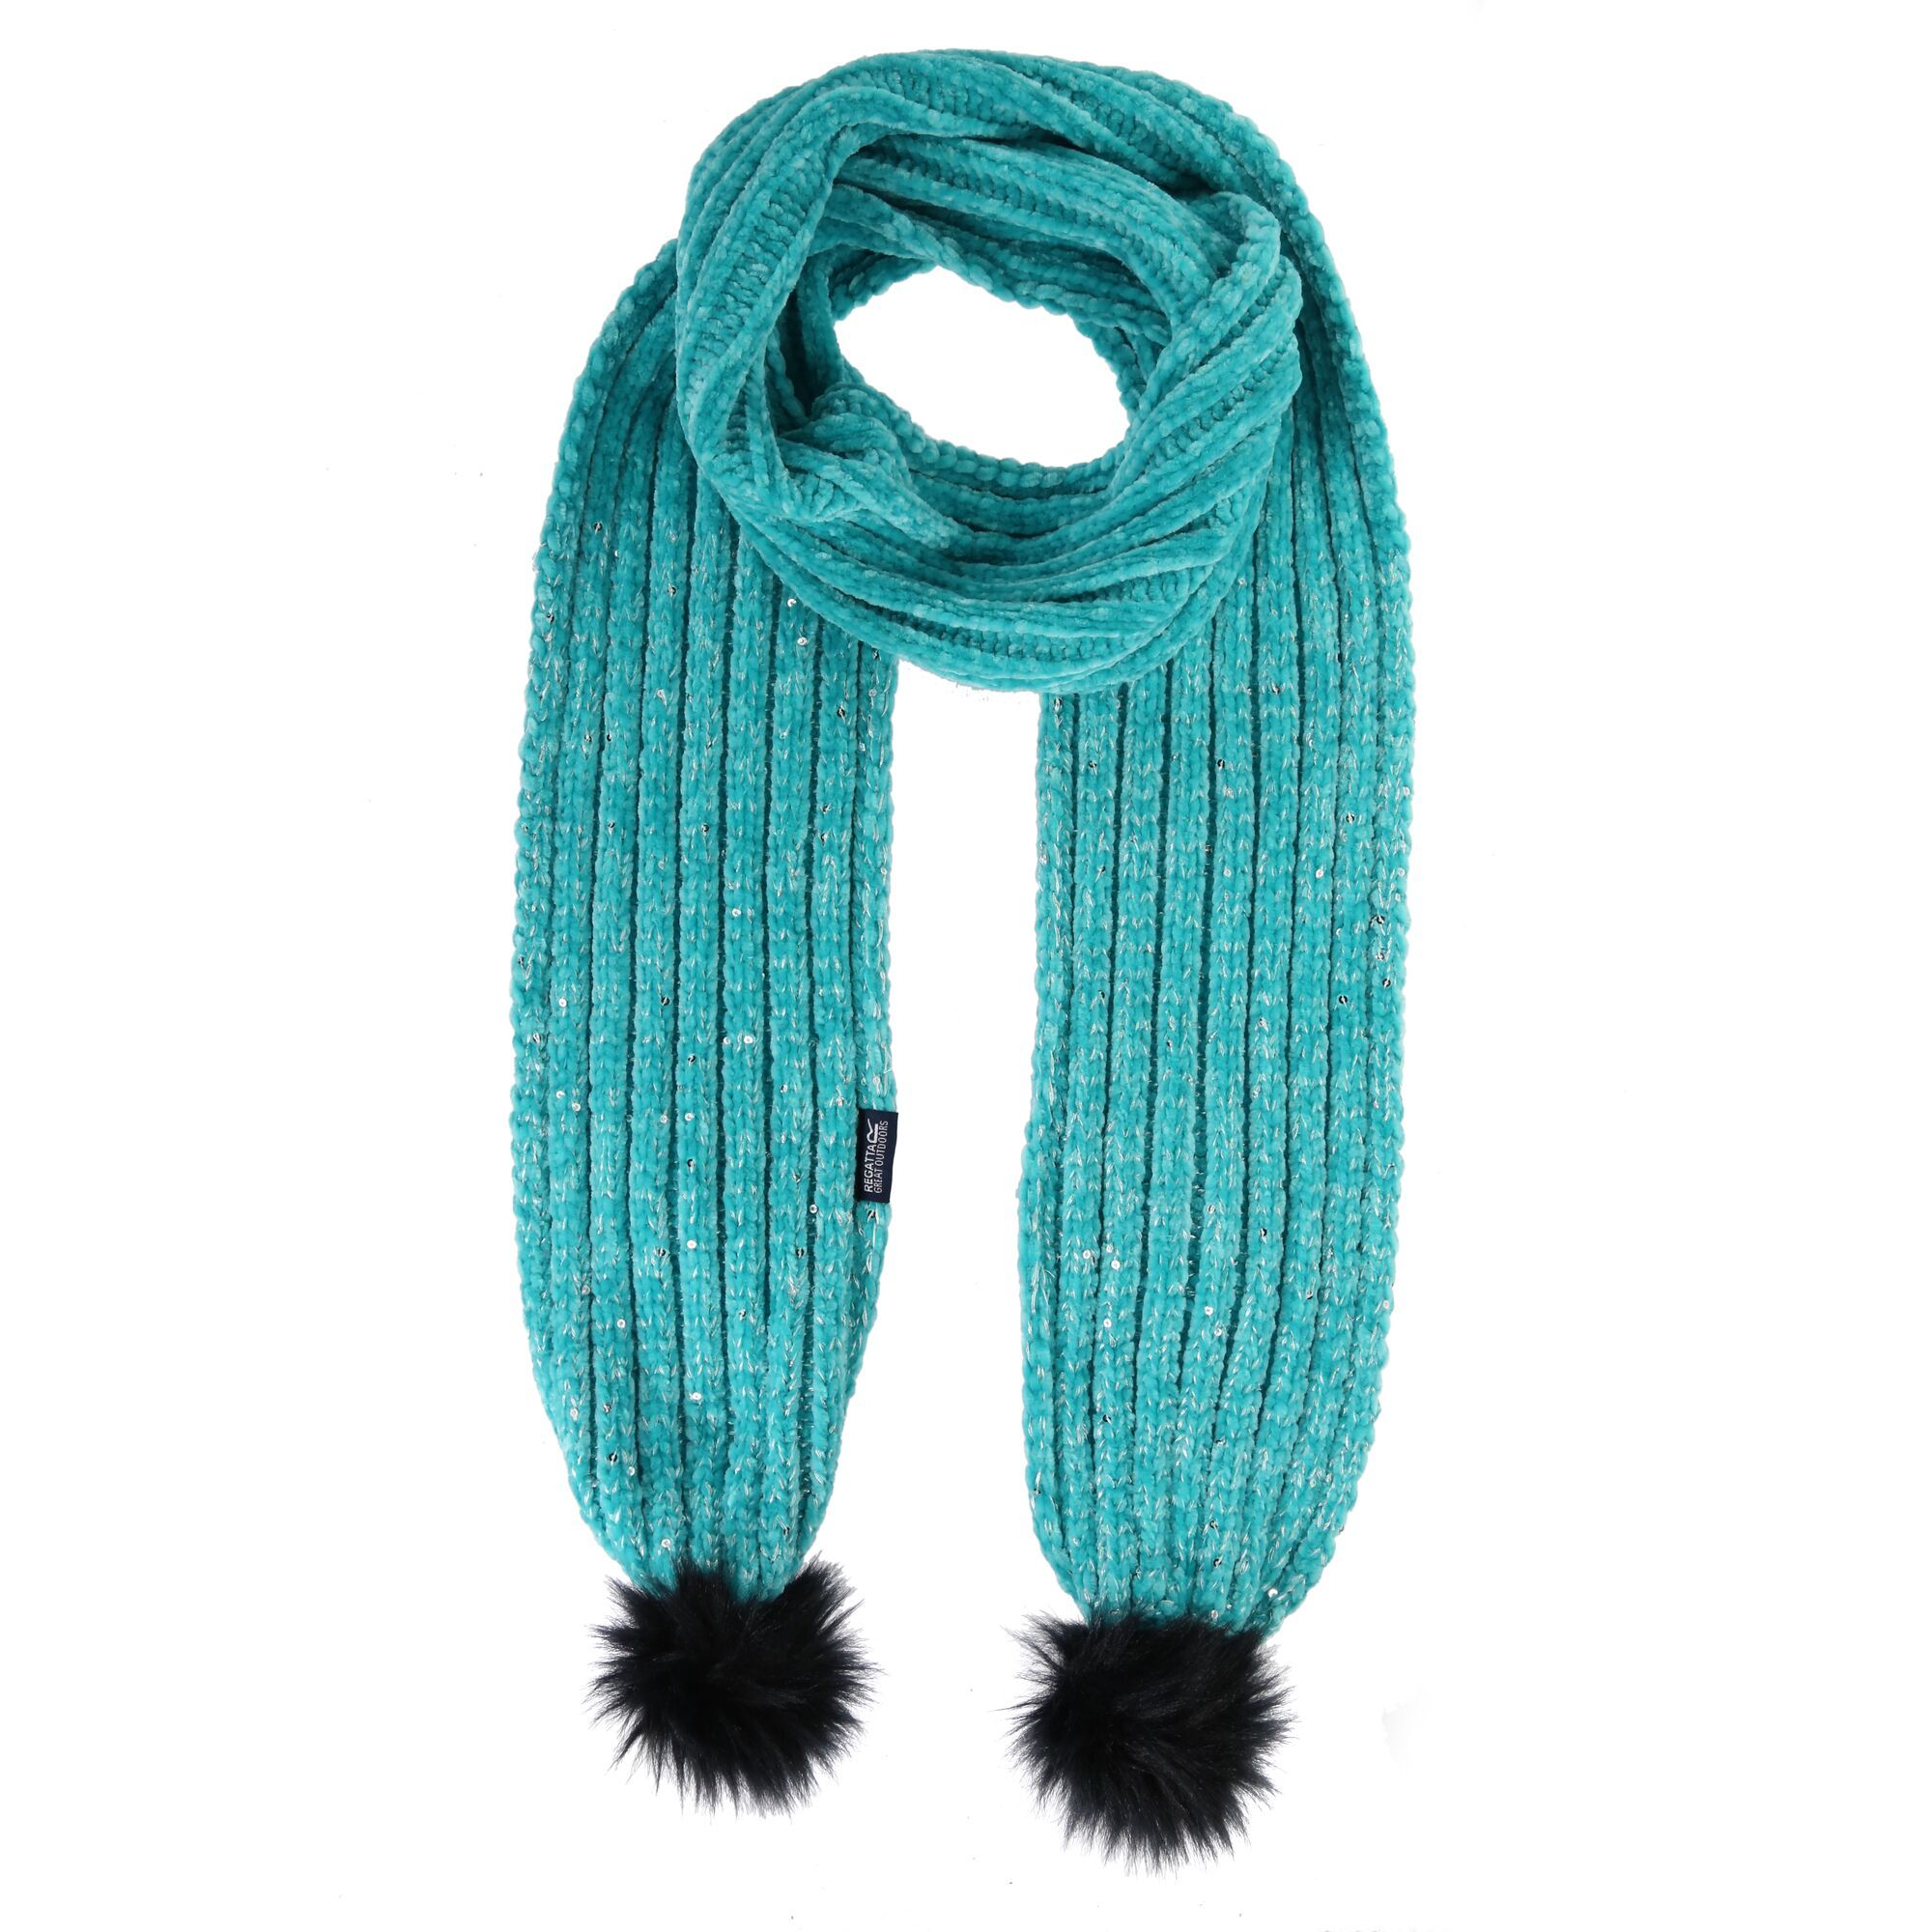 Material: 50% polyester, 50% acrylic. Winter ready and super cute, the Hedy Lux Scarf is made of easy-care acrylic yarn with a smattering of sequins and finished with faux-fur pom poms.